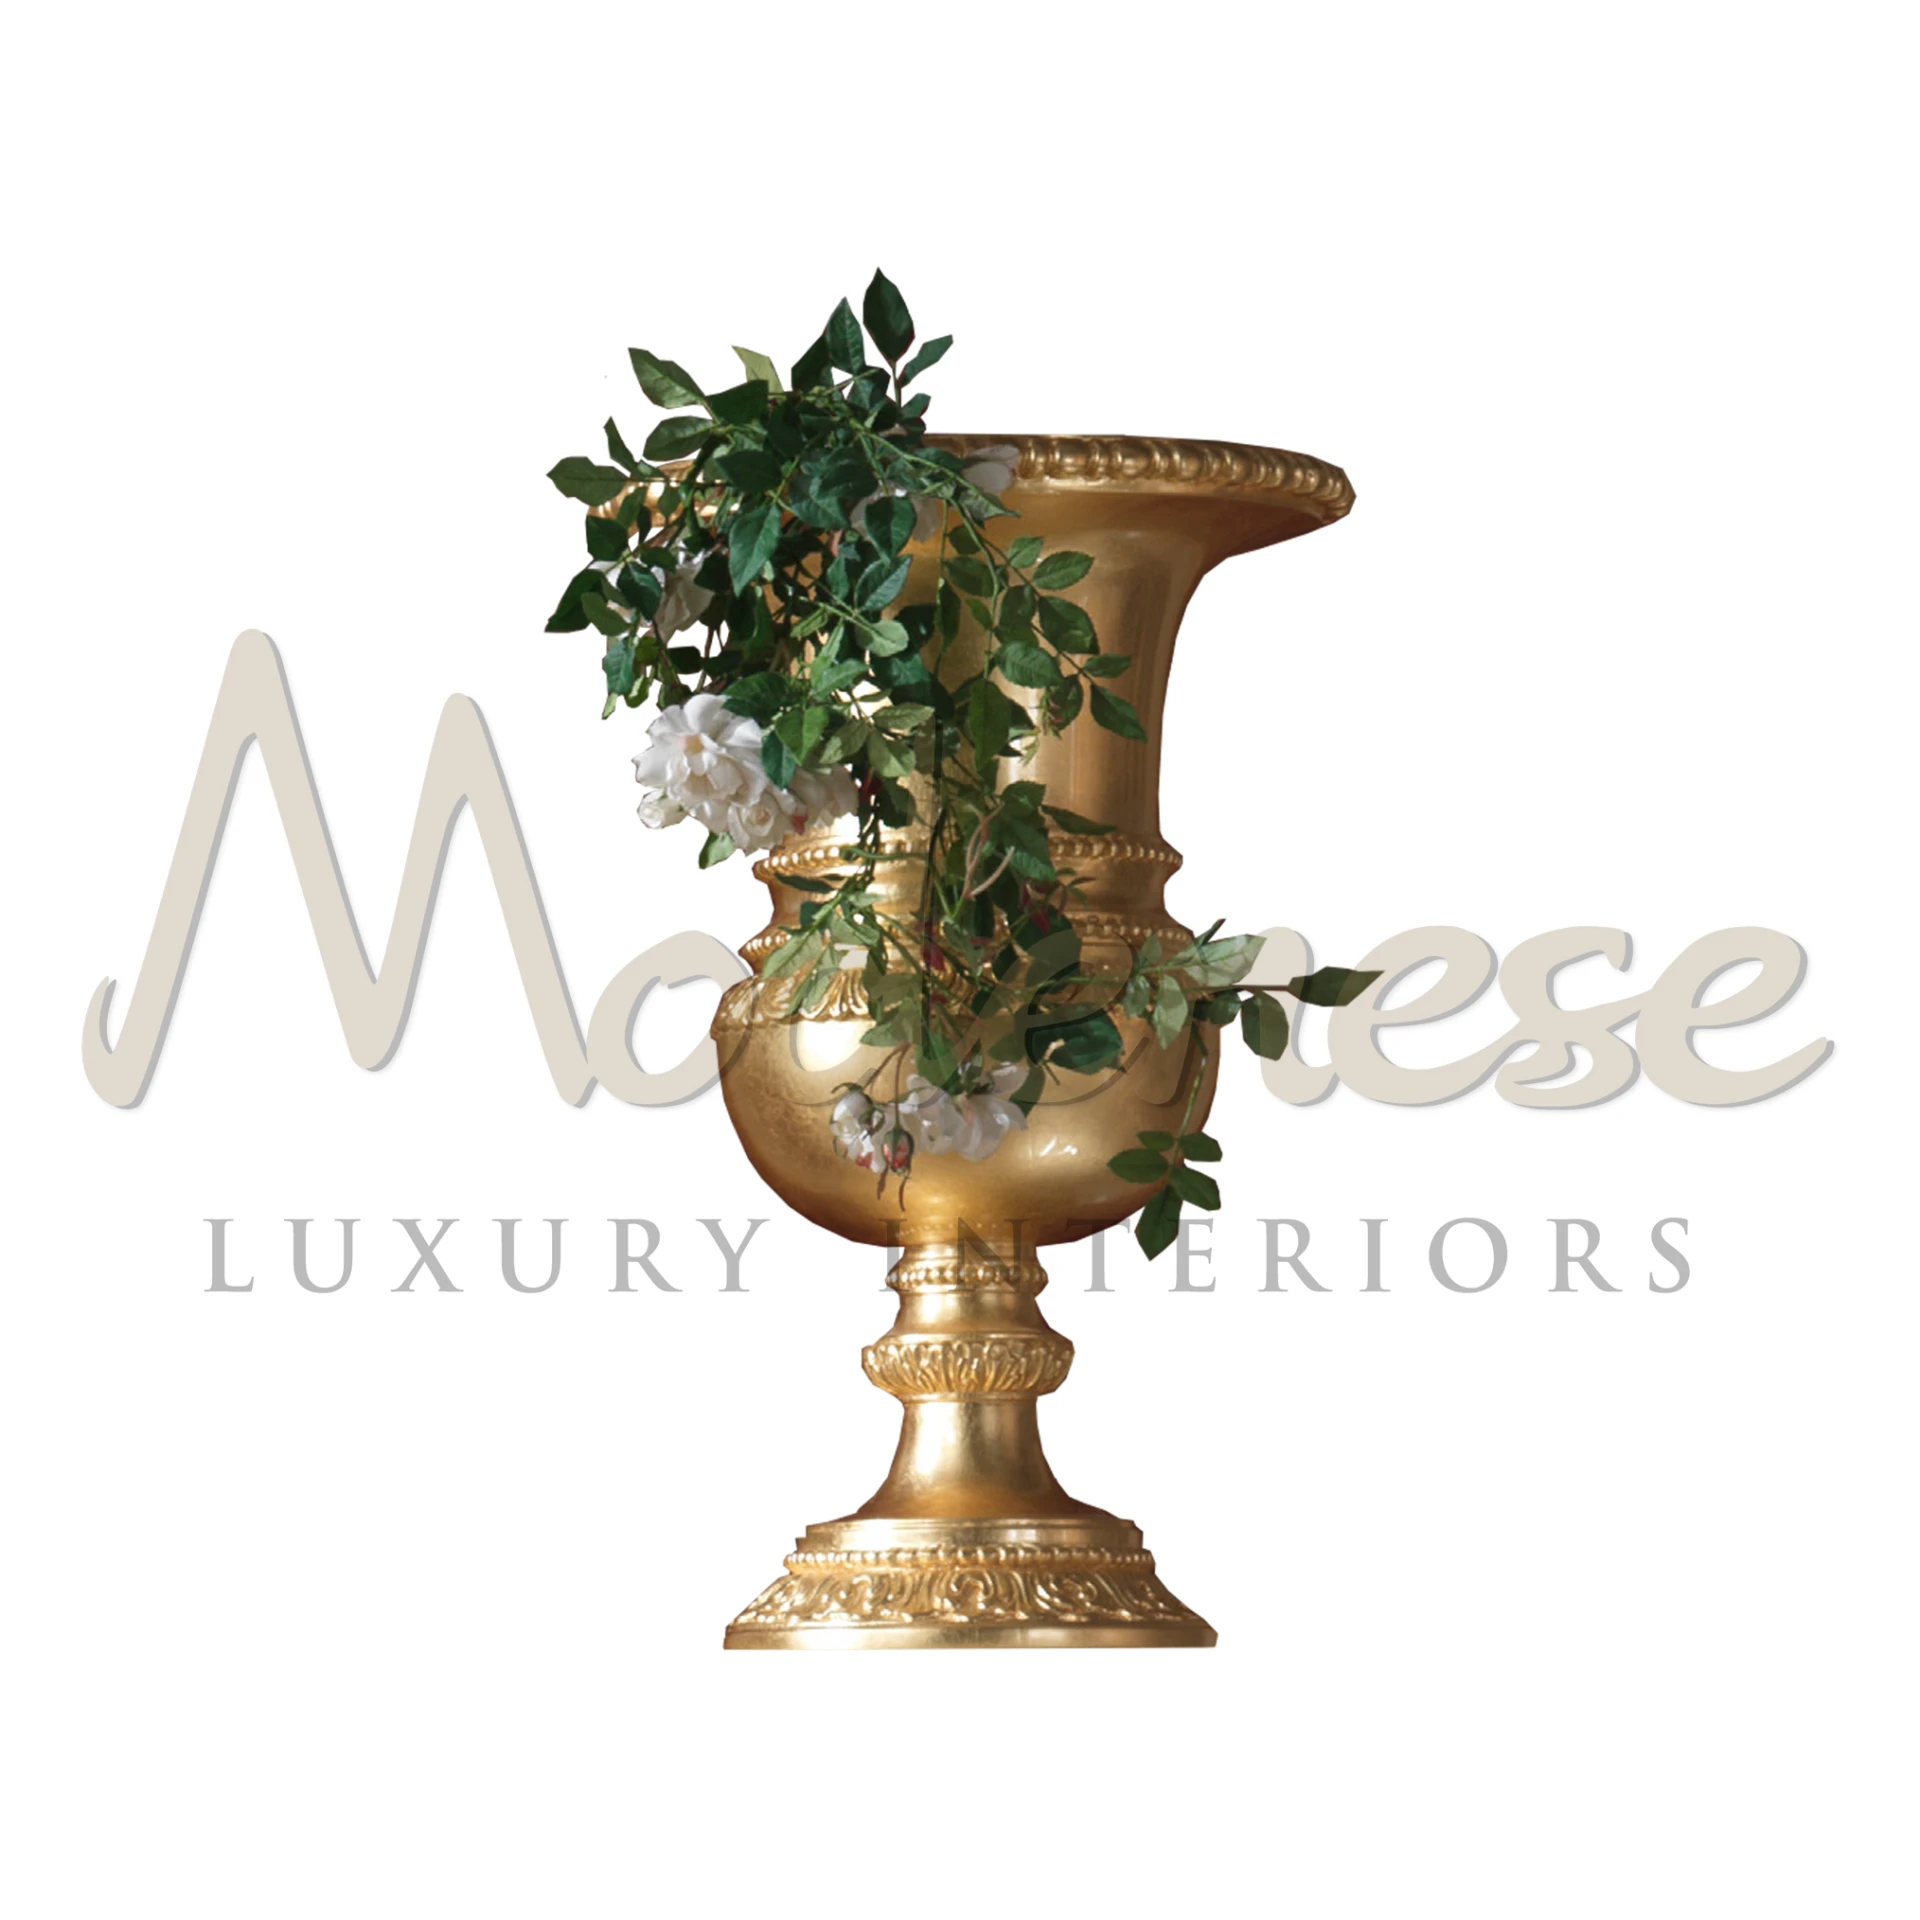 Golden Vase by Modenese Furniture with illustrious legacy design in gold leaf finish
